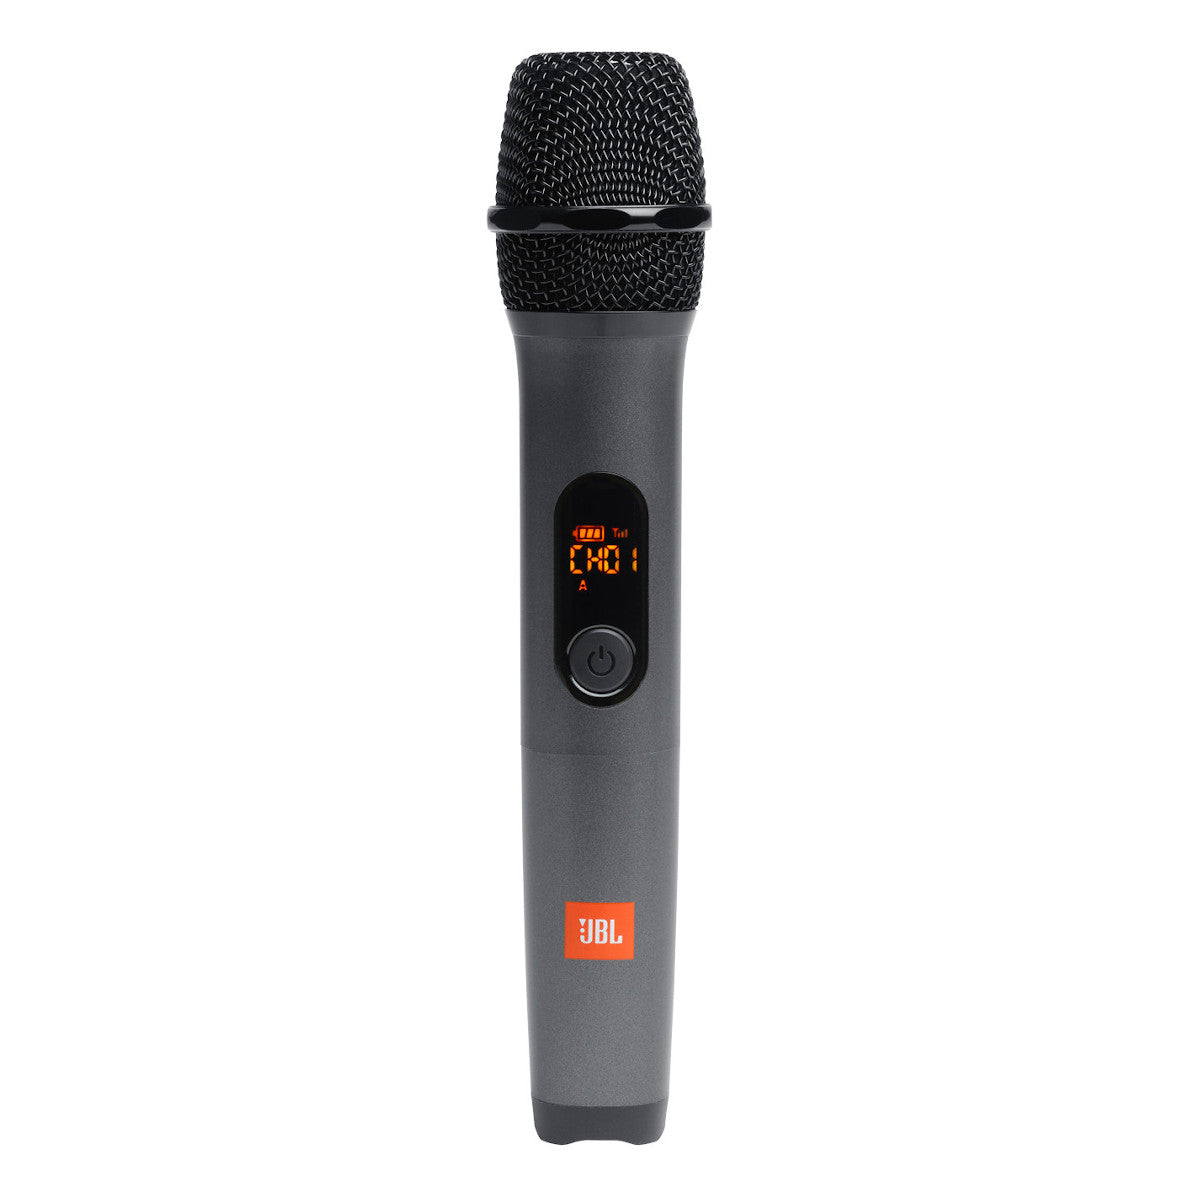 JBL PartyBox On-The-Go - Black